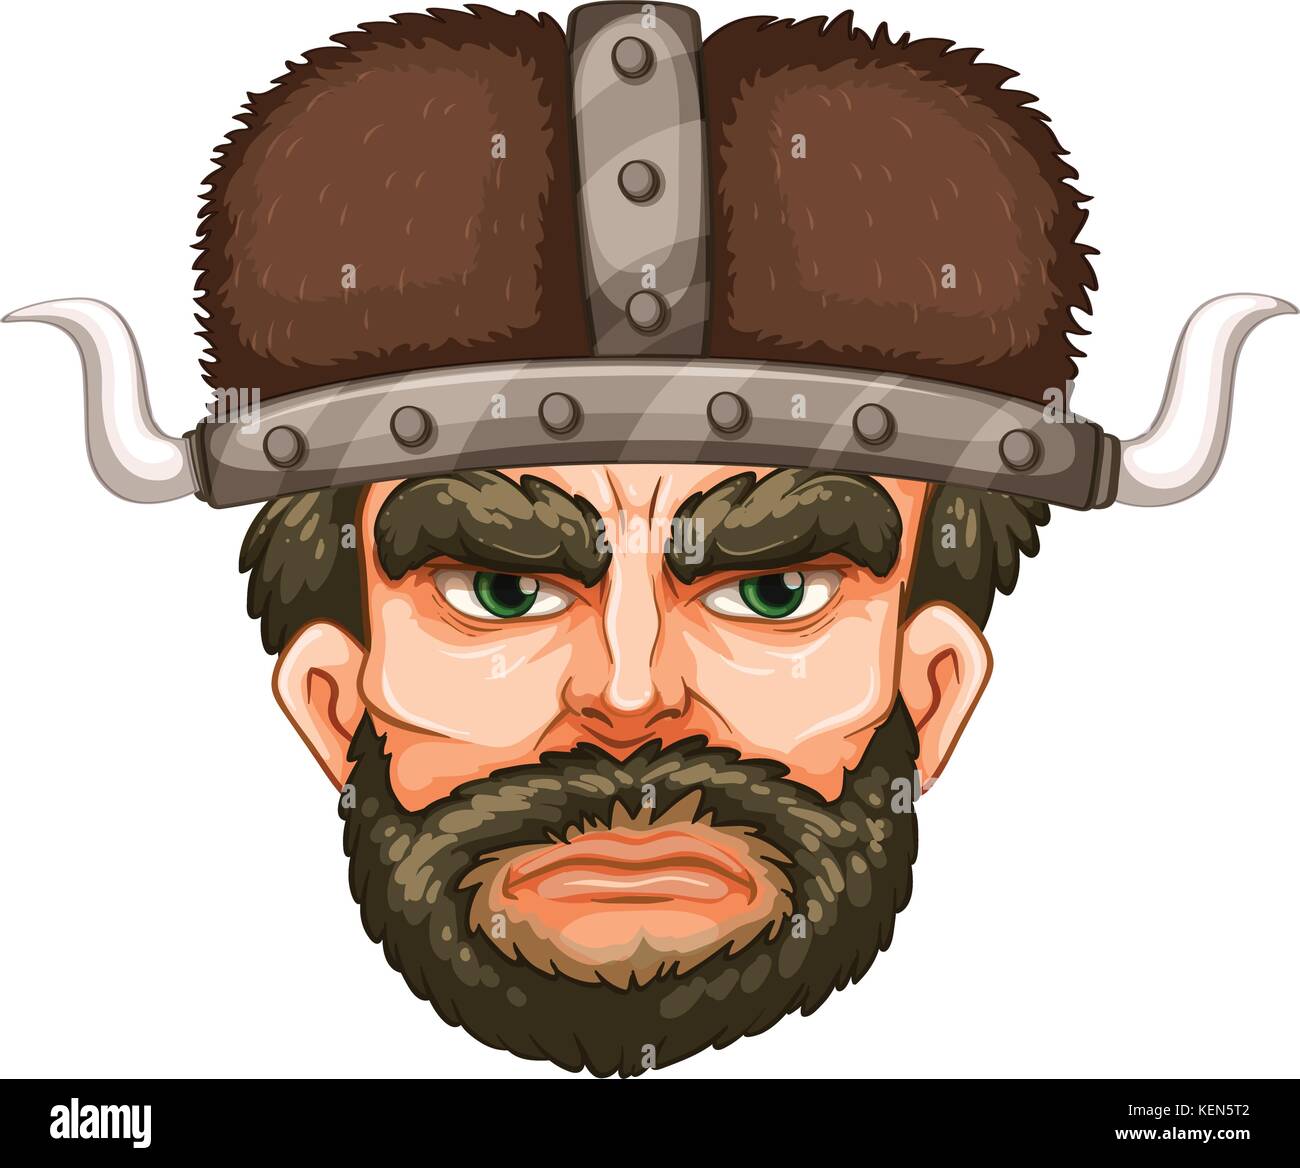 Illustration of a male viking face Stock Vector